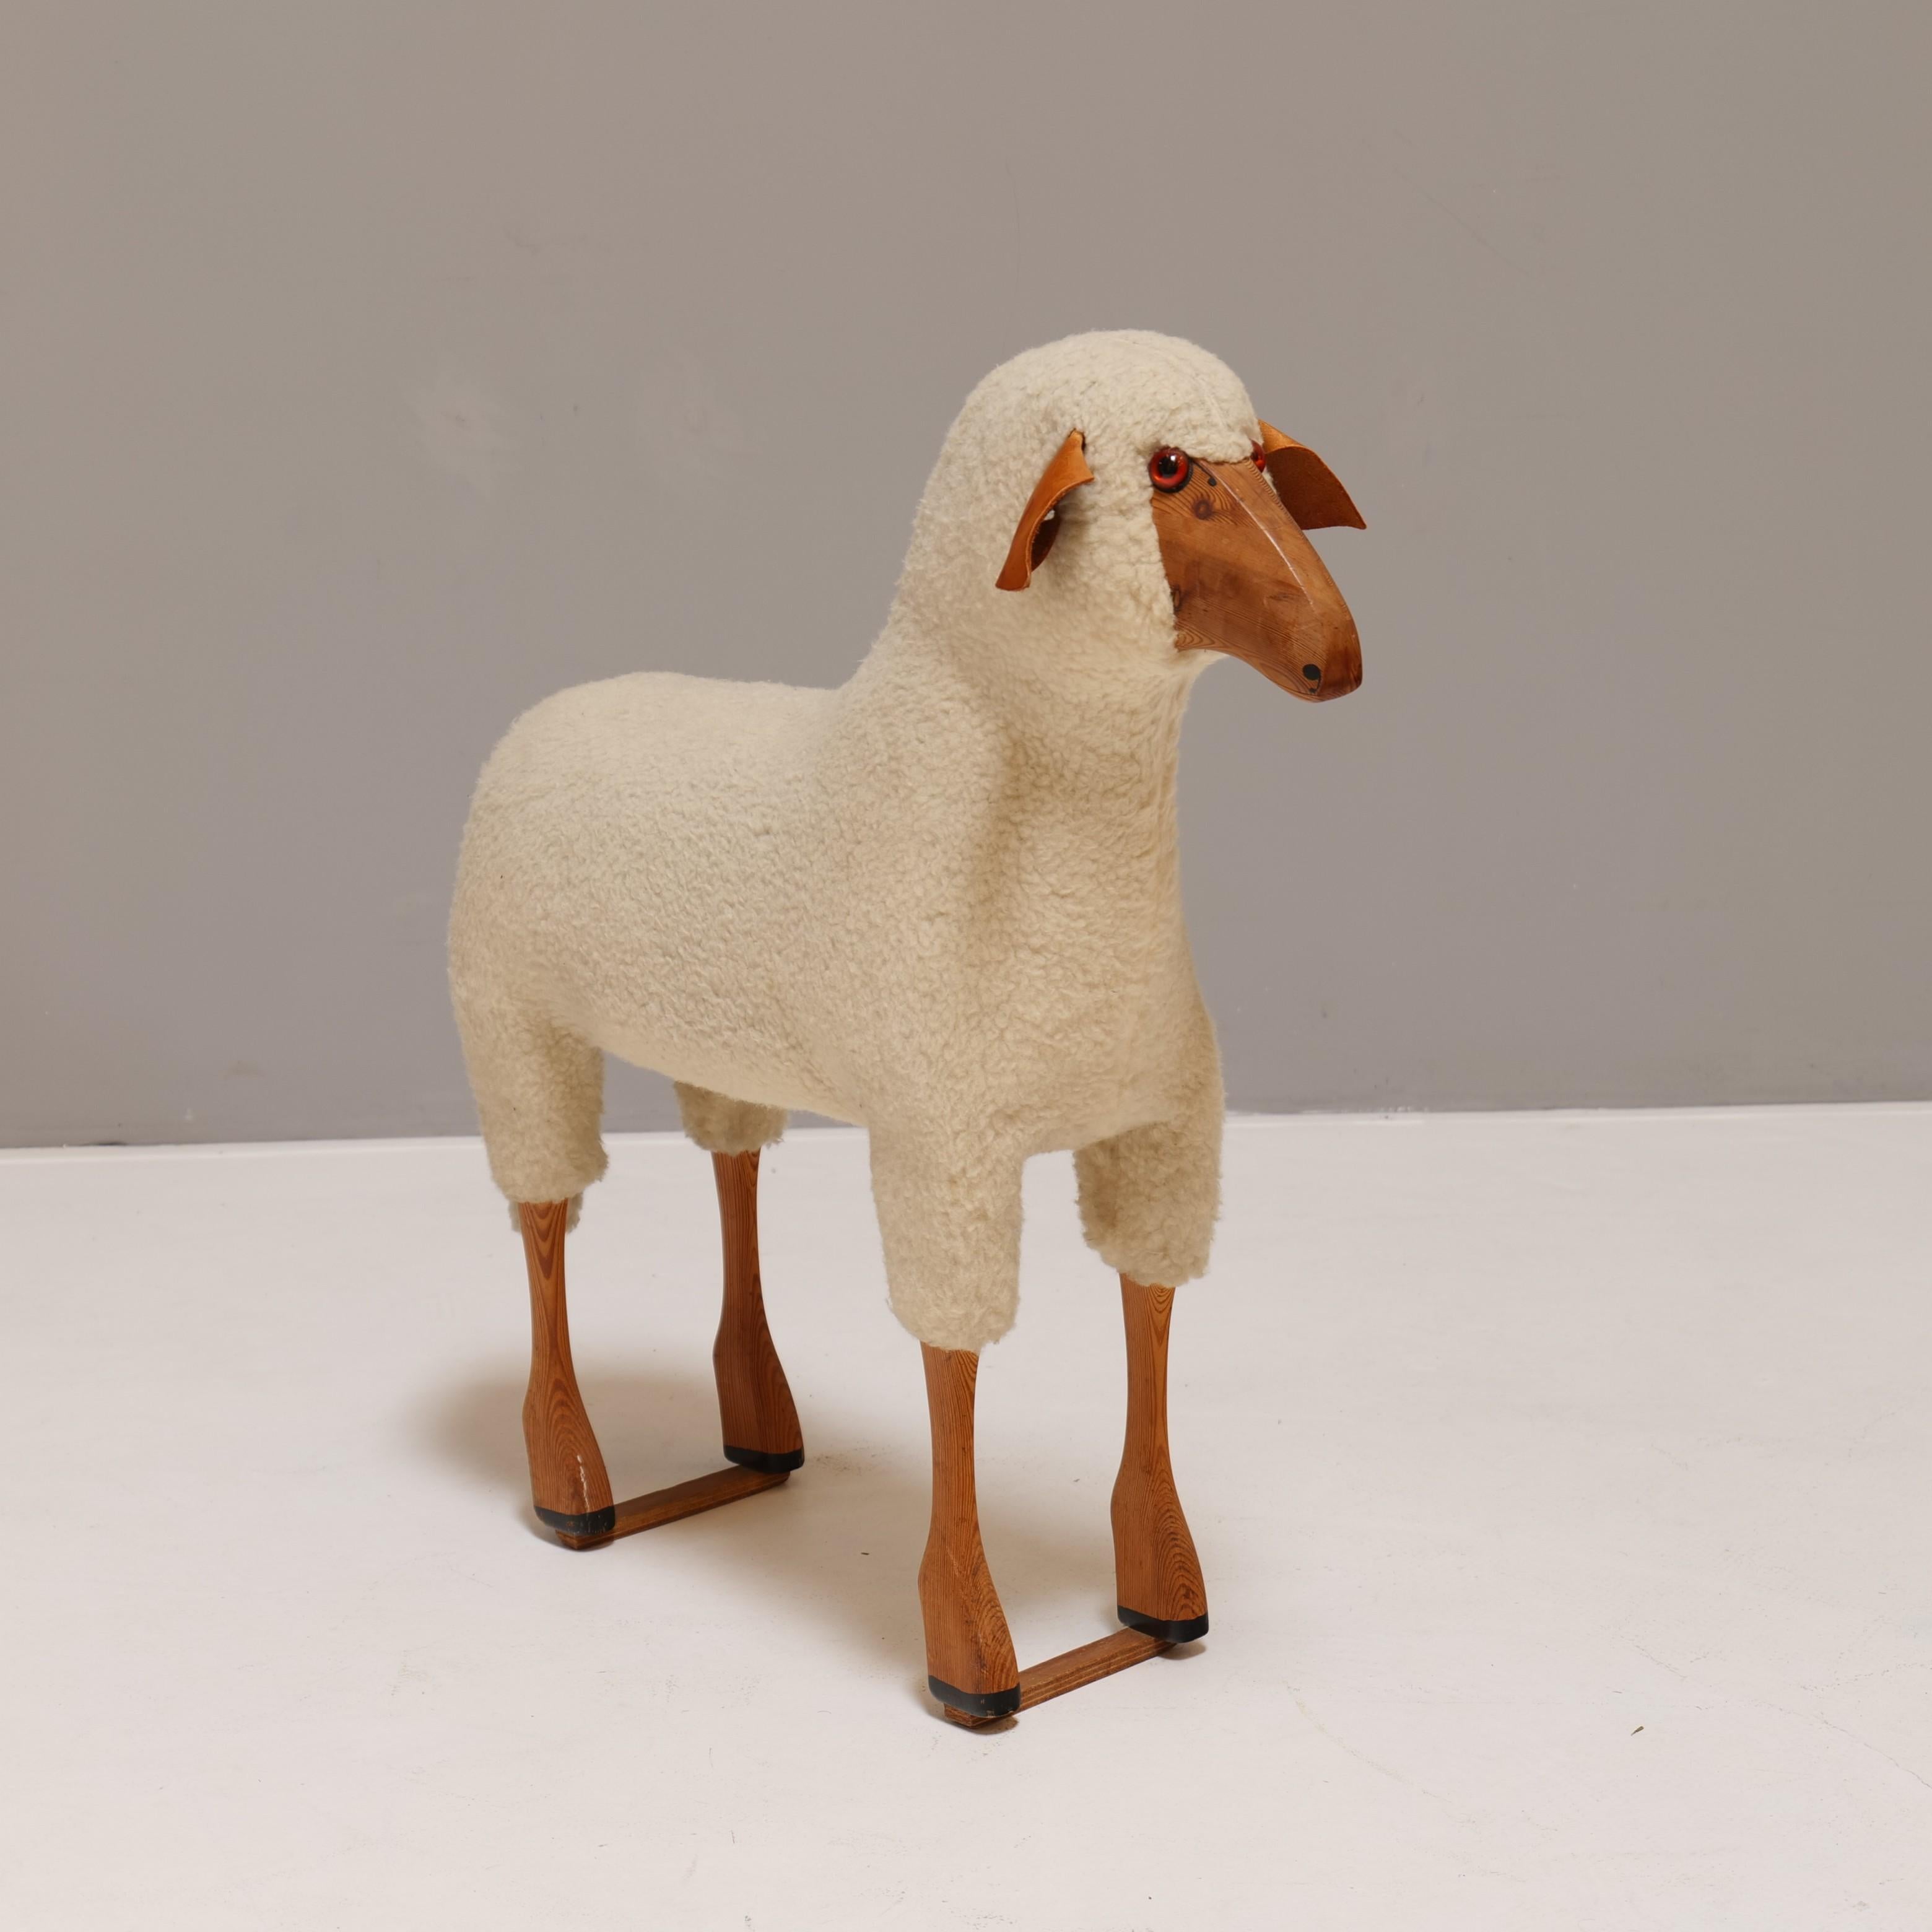 Rare and taged wool sheep in style of Lalanne from the 1970s

Made by Hanns Peter Krafft for Schlachenmayer nomotta (wool manufacturer)